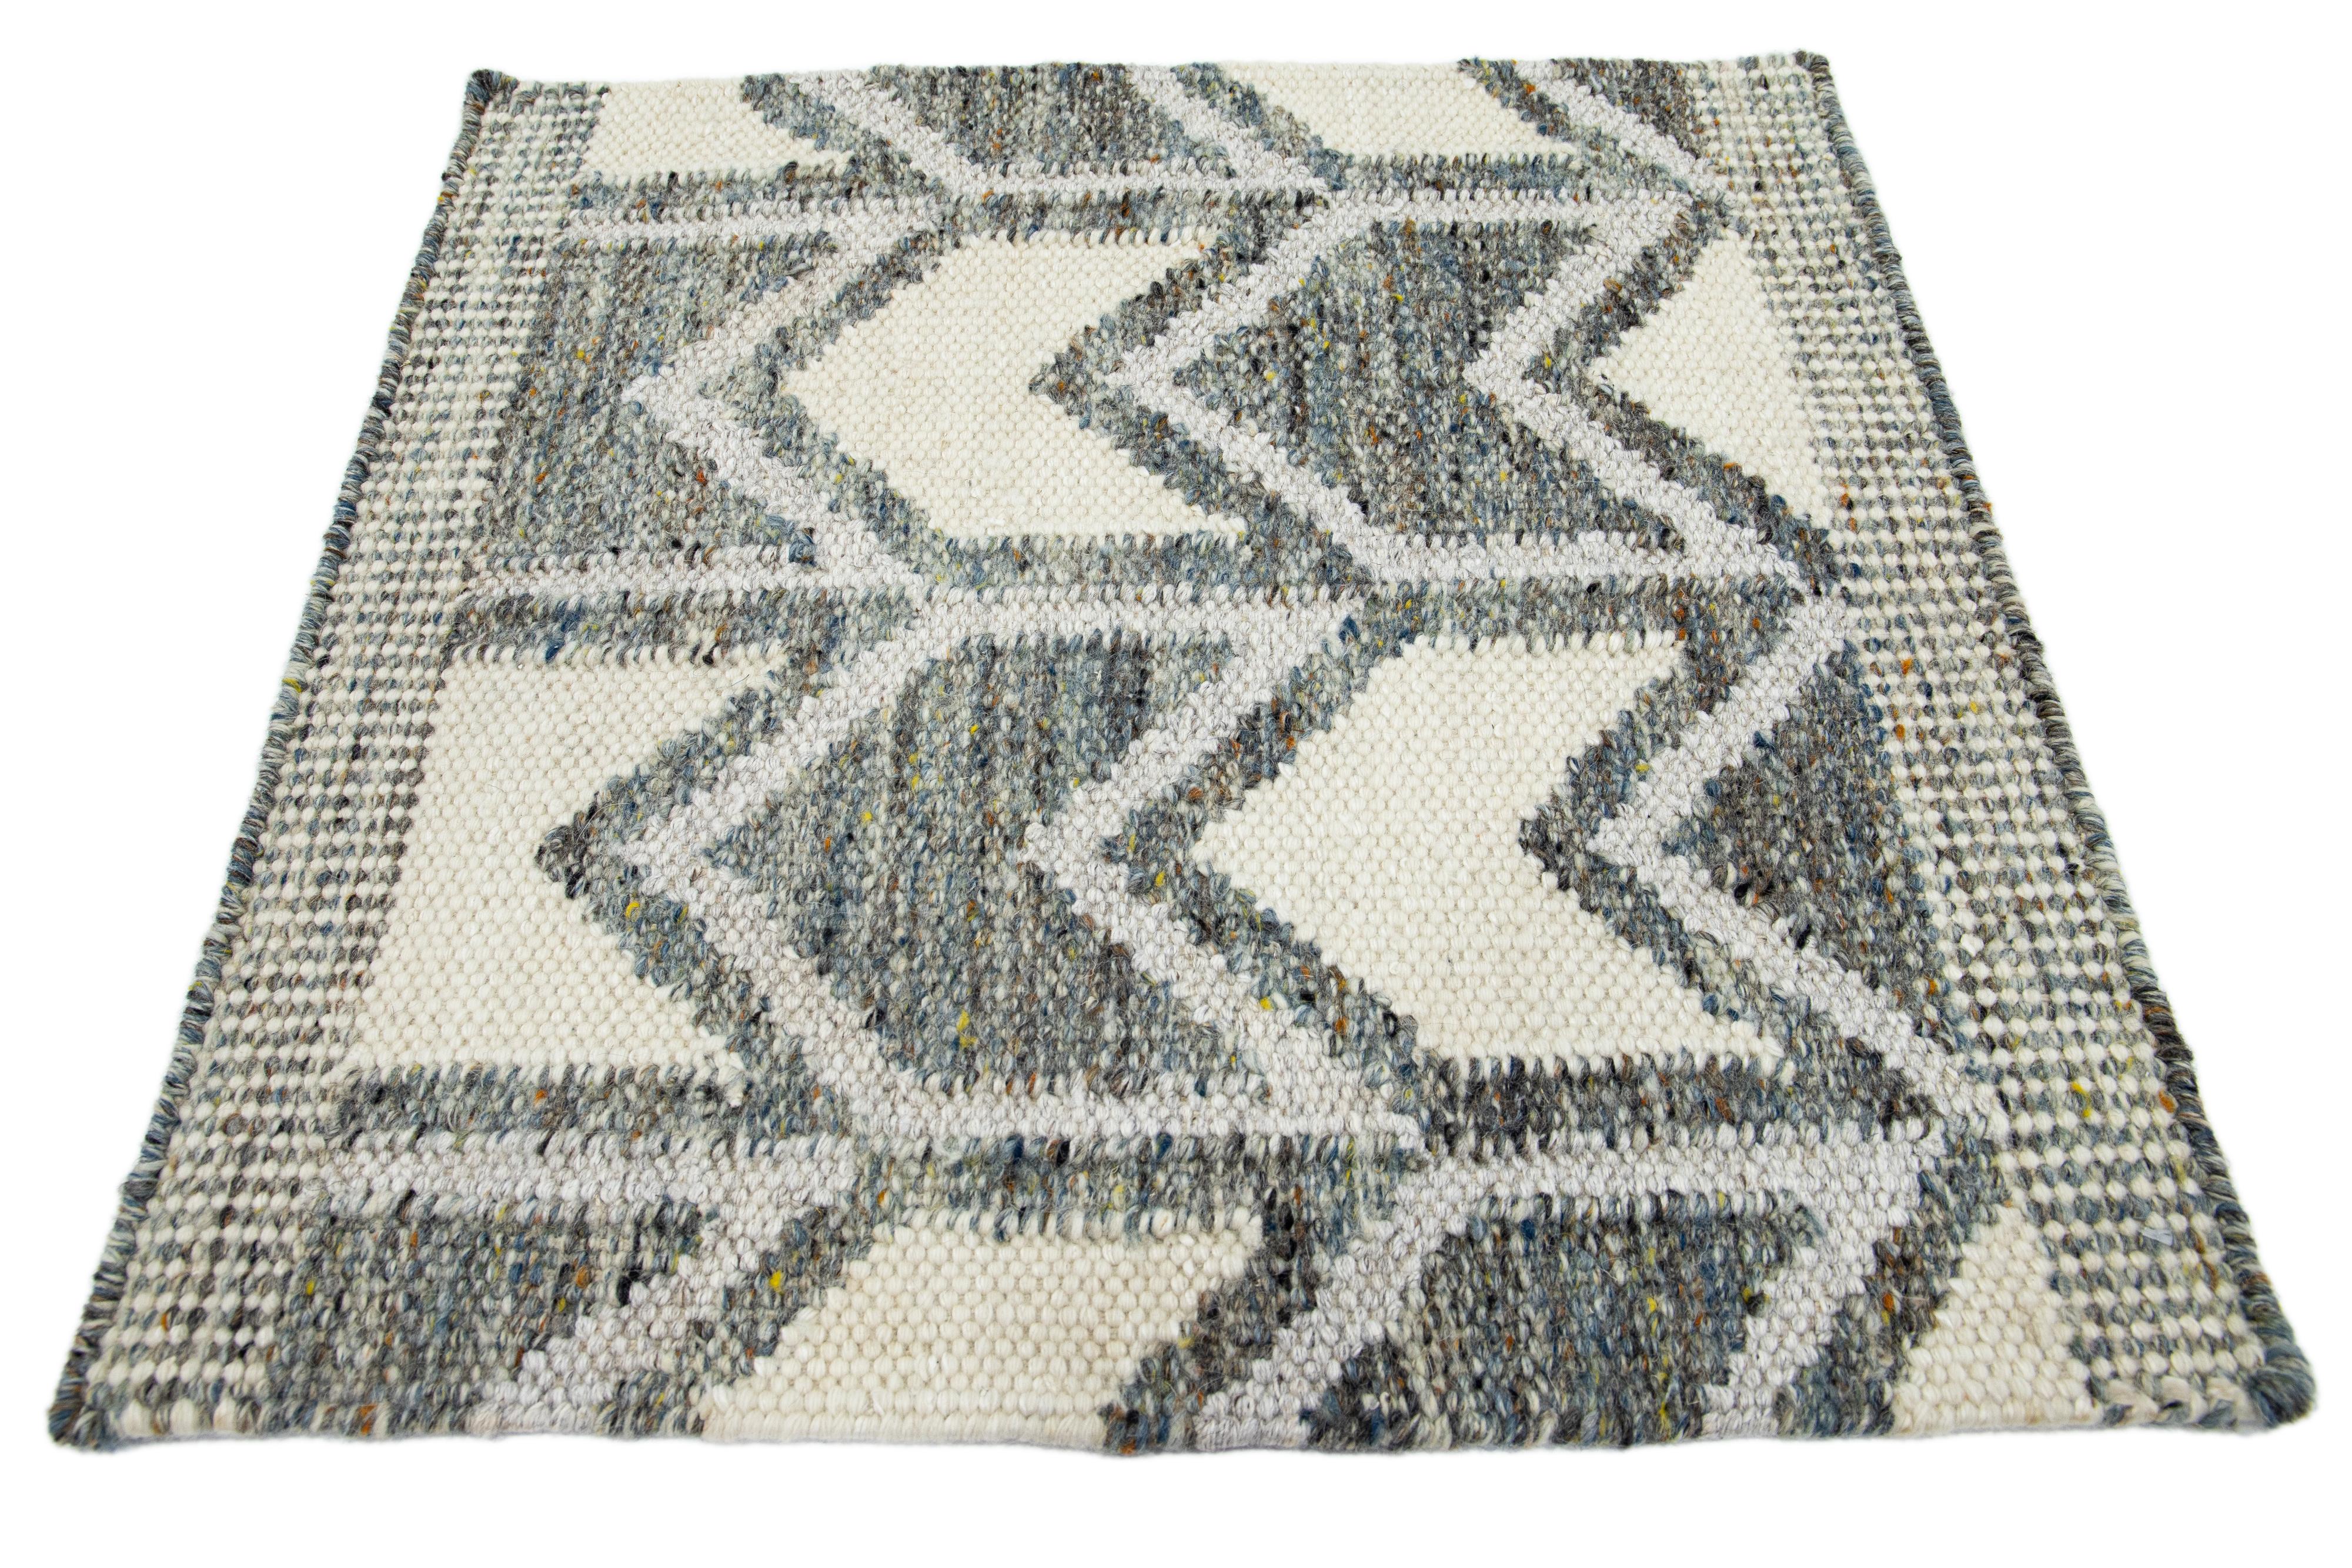 Apadana's Modern Swedish style Handwoven wool custom rug. Custom sizes and colors made-to-order. 

Material: Wool 
Techniques: Hand-Woven
Style: Swedish 
Lead time: Approx. 15-16 wks available 
Colors: As shown, other custom colors are